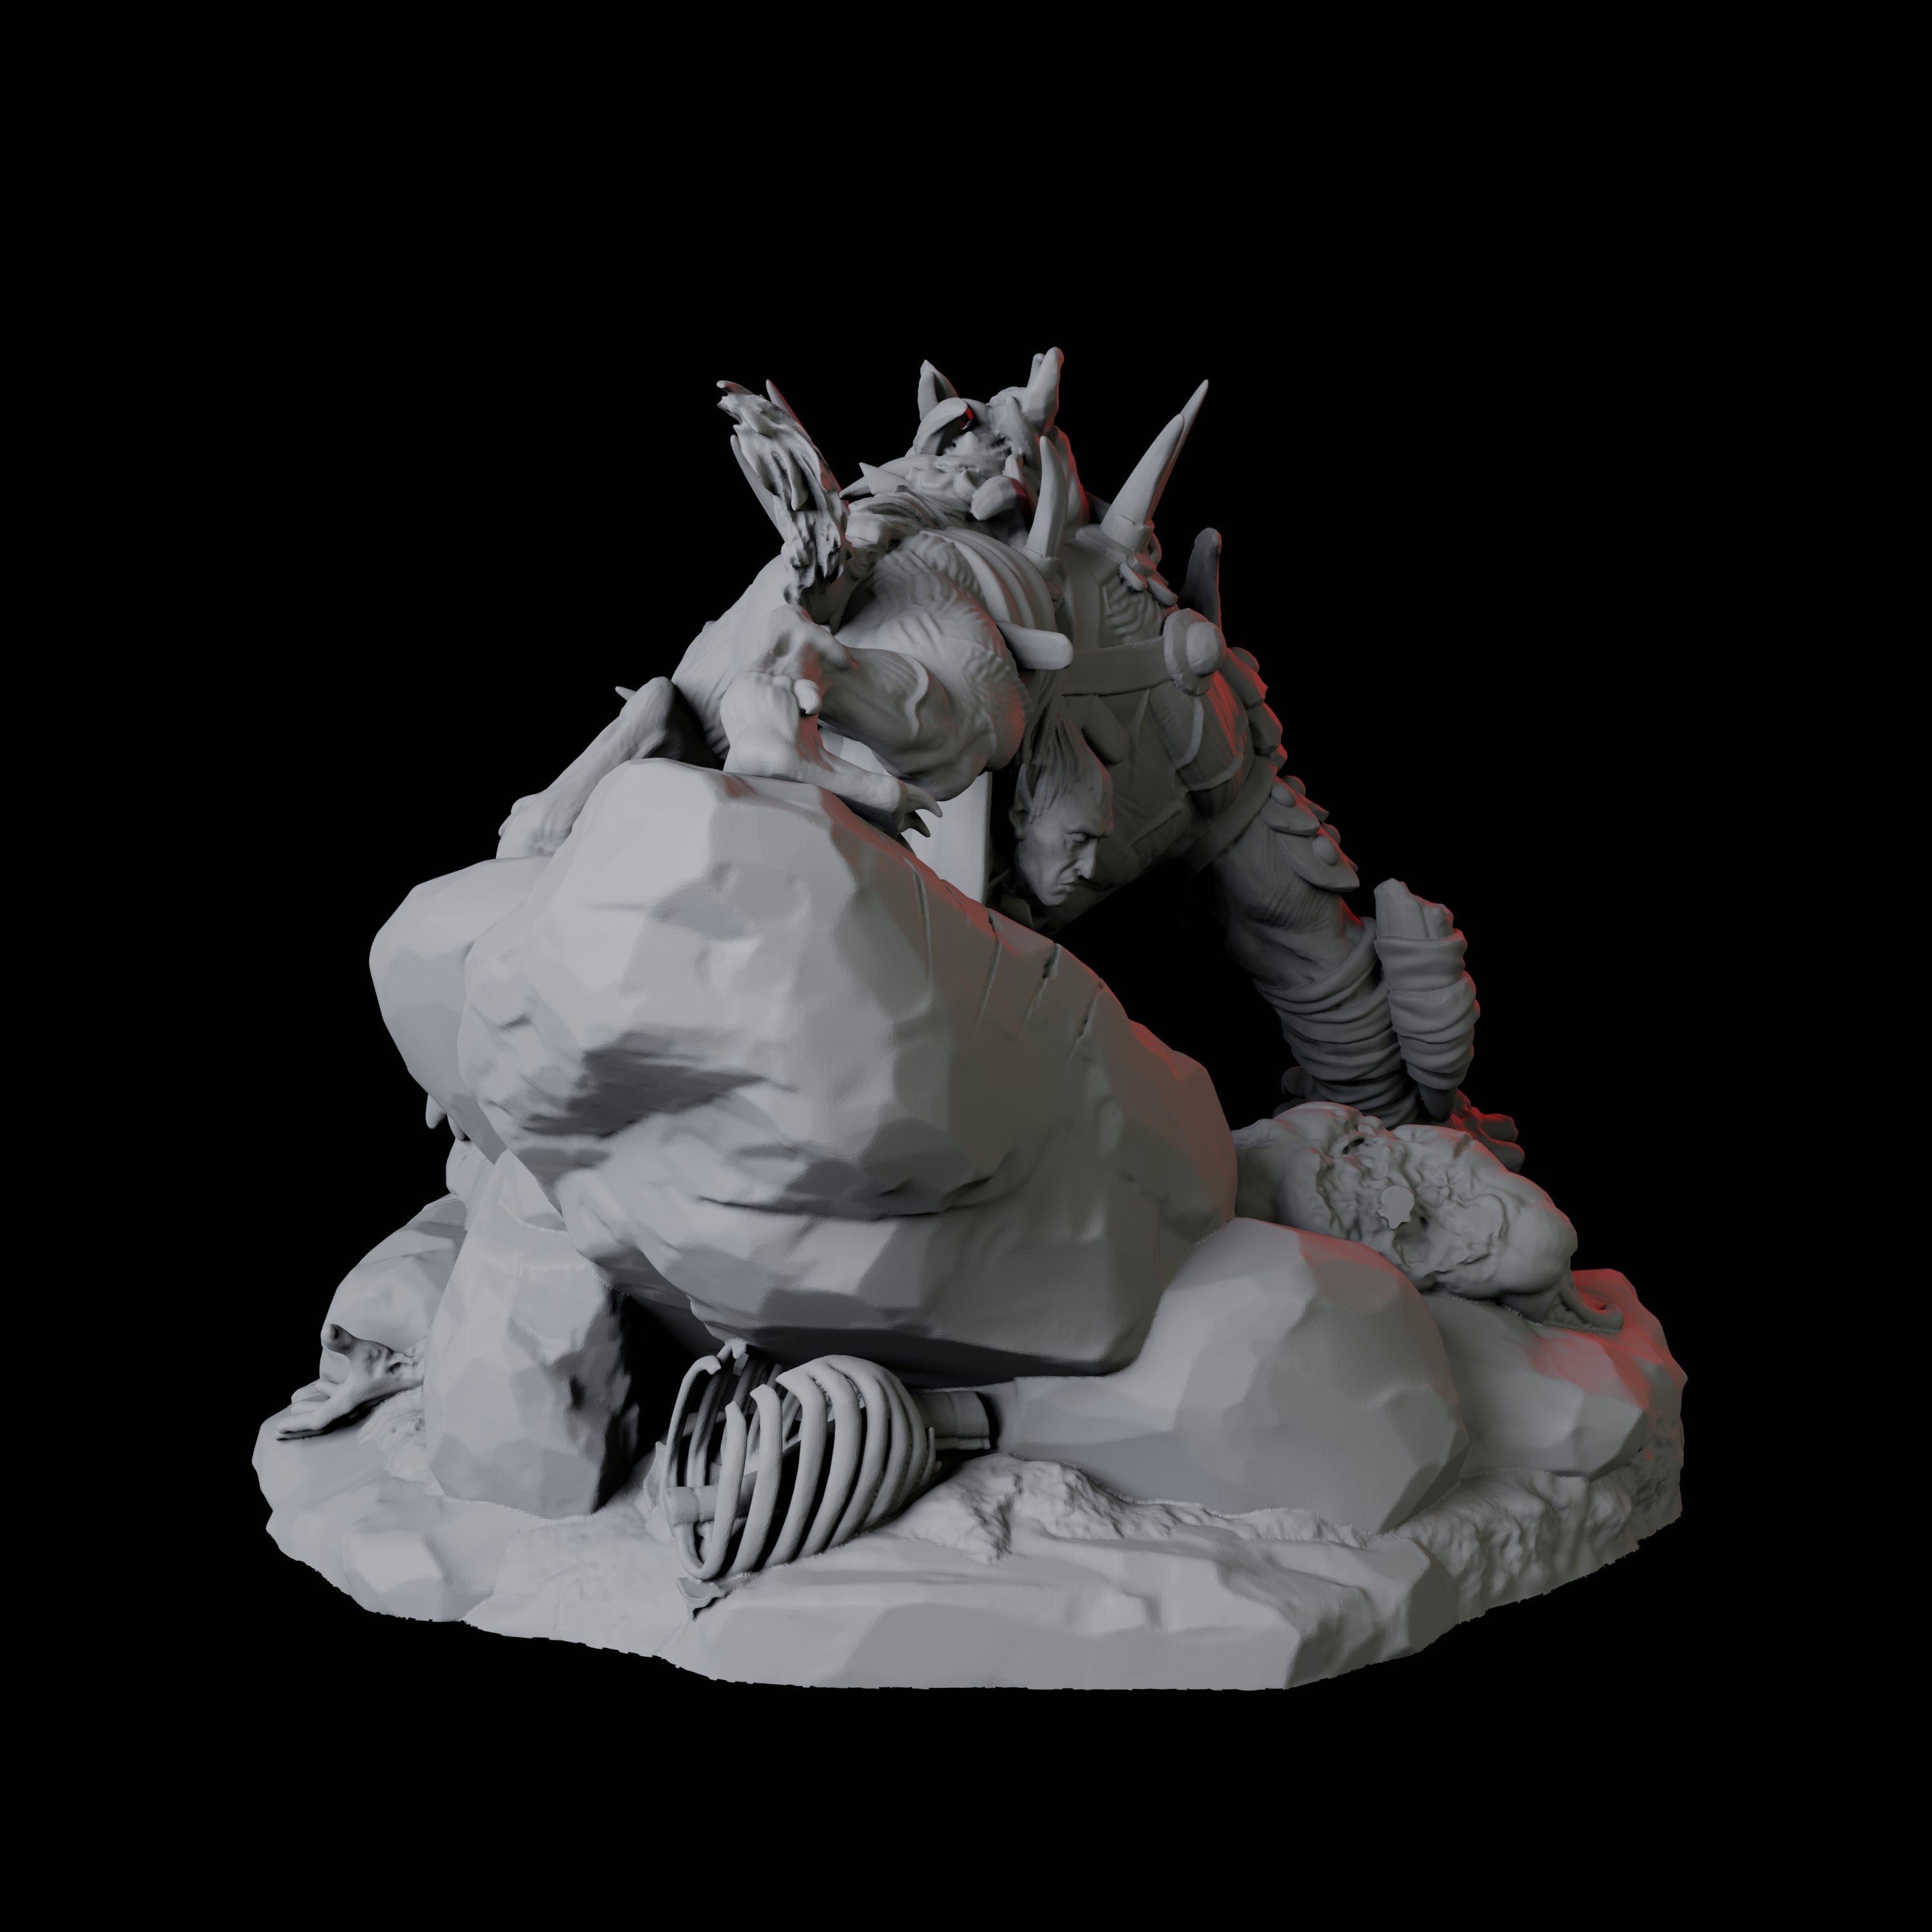 Gnoll Tracker C Miniature for Dungeons and Dragons, Pathfinder or other TTRPGs